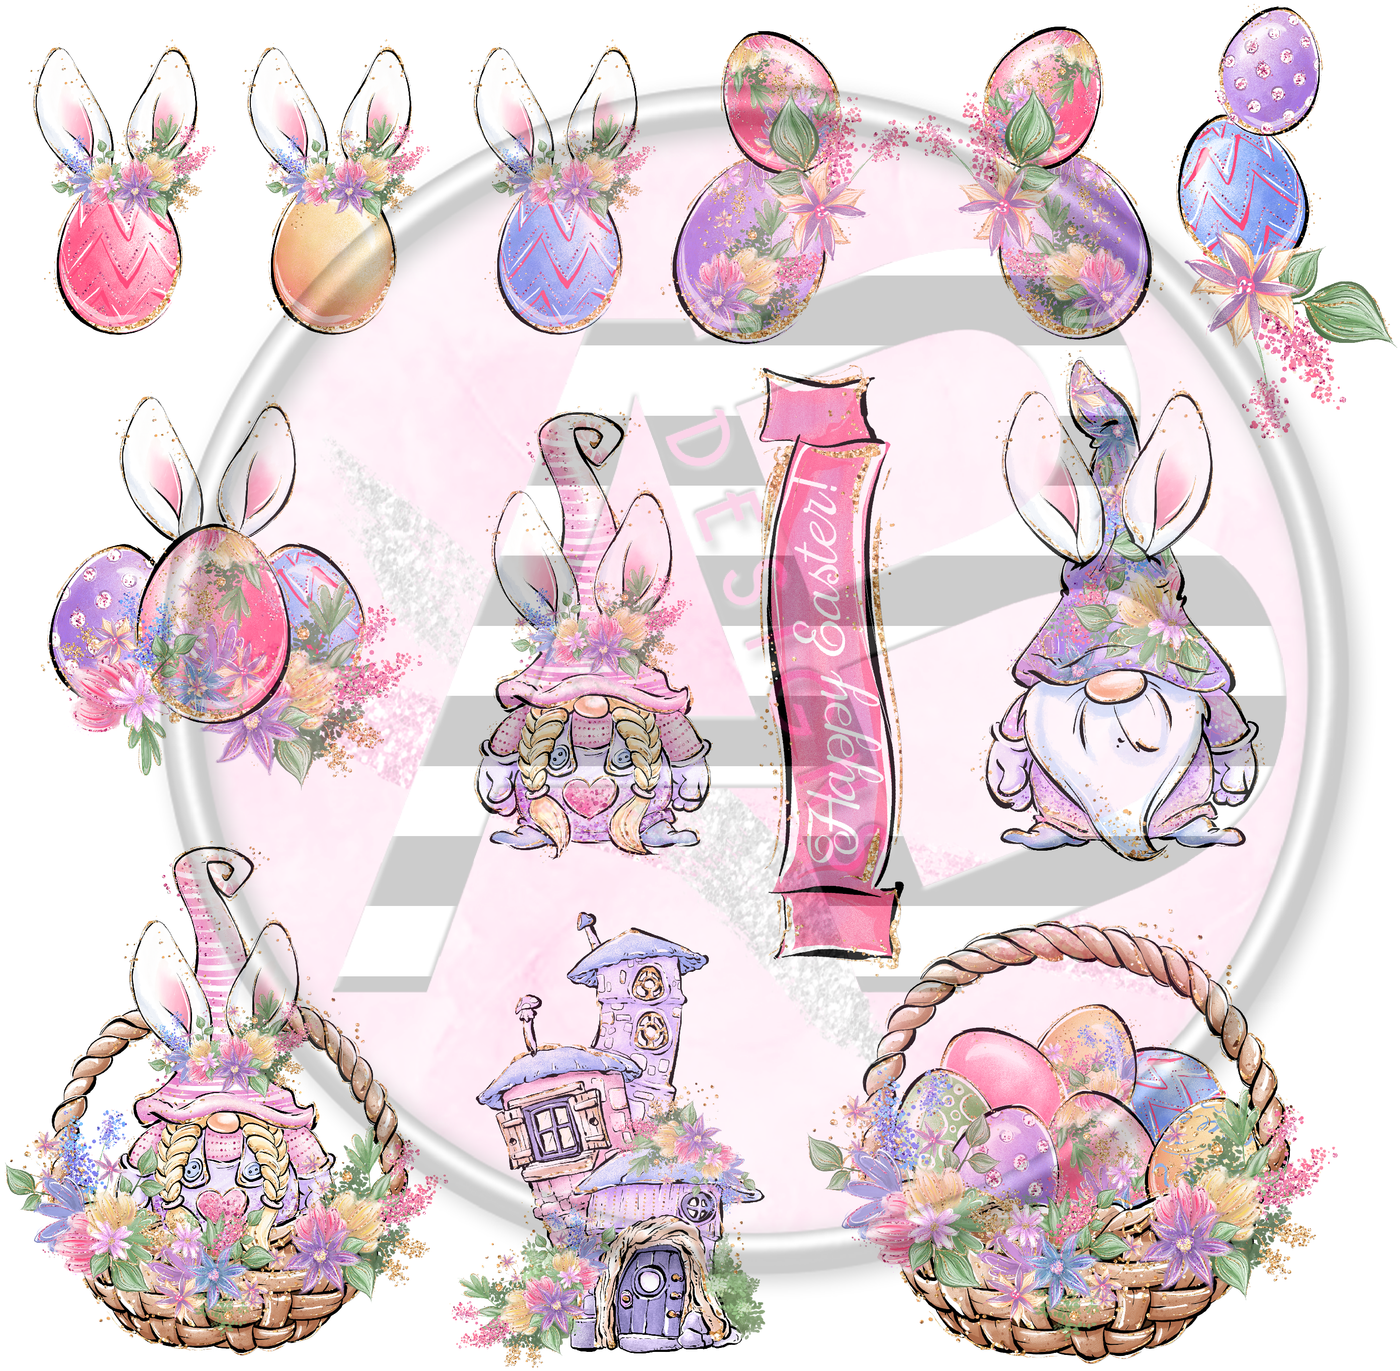 Adhesive Patterned Vinyl - Easter Gnomes 2 - 12 x 12 Clear Sheet